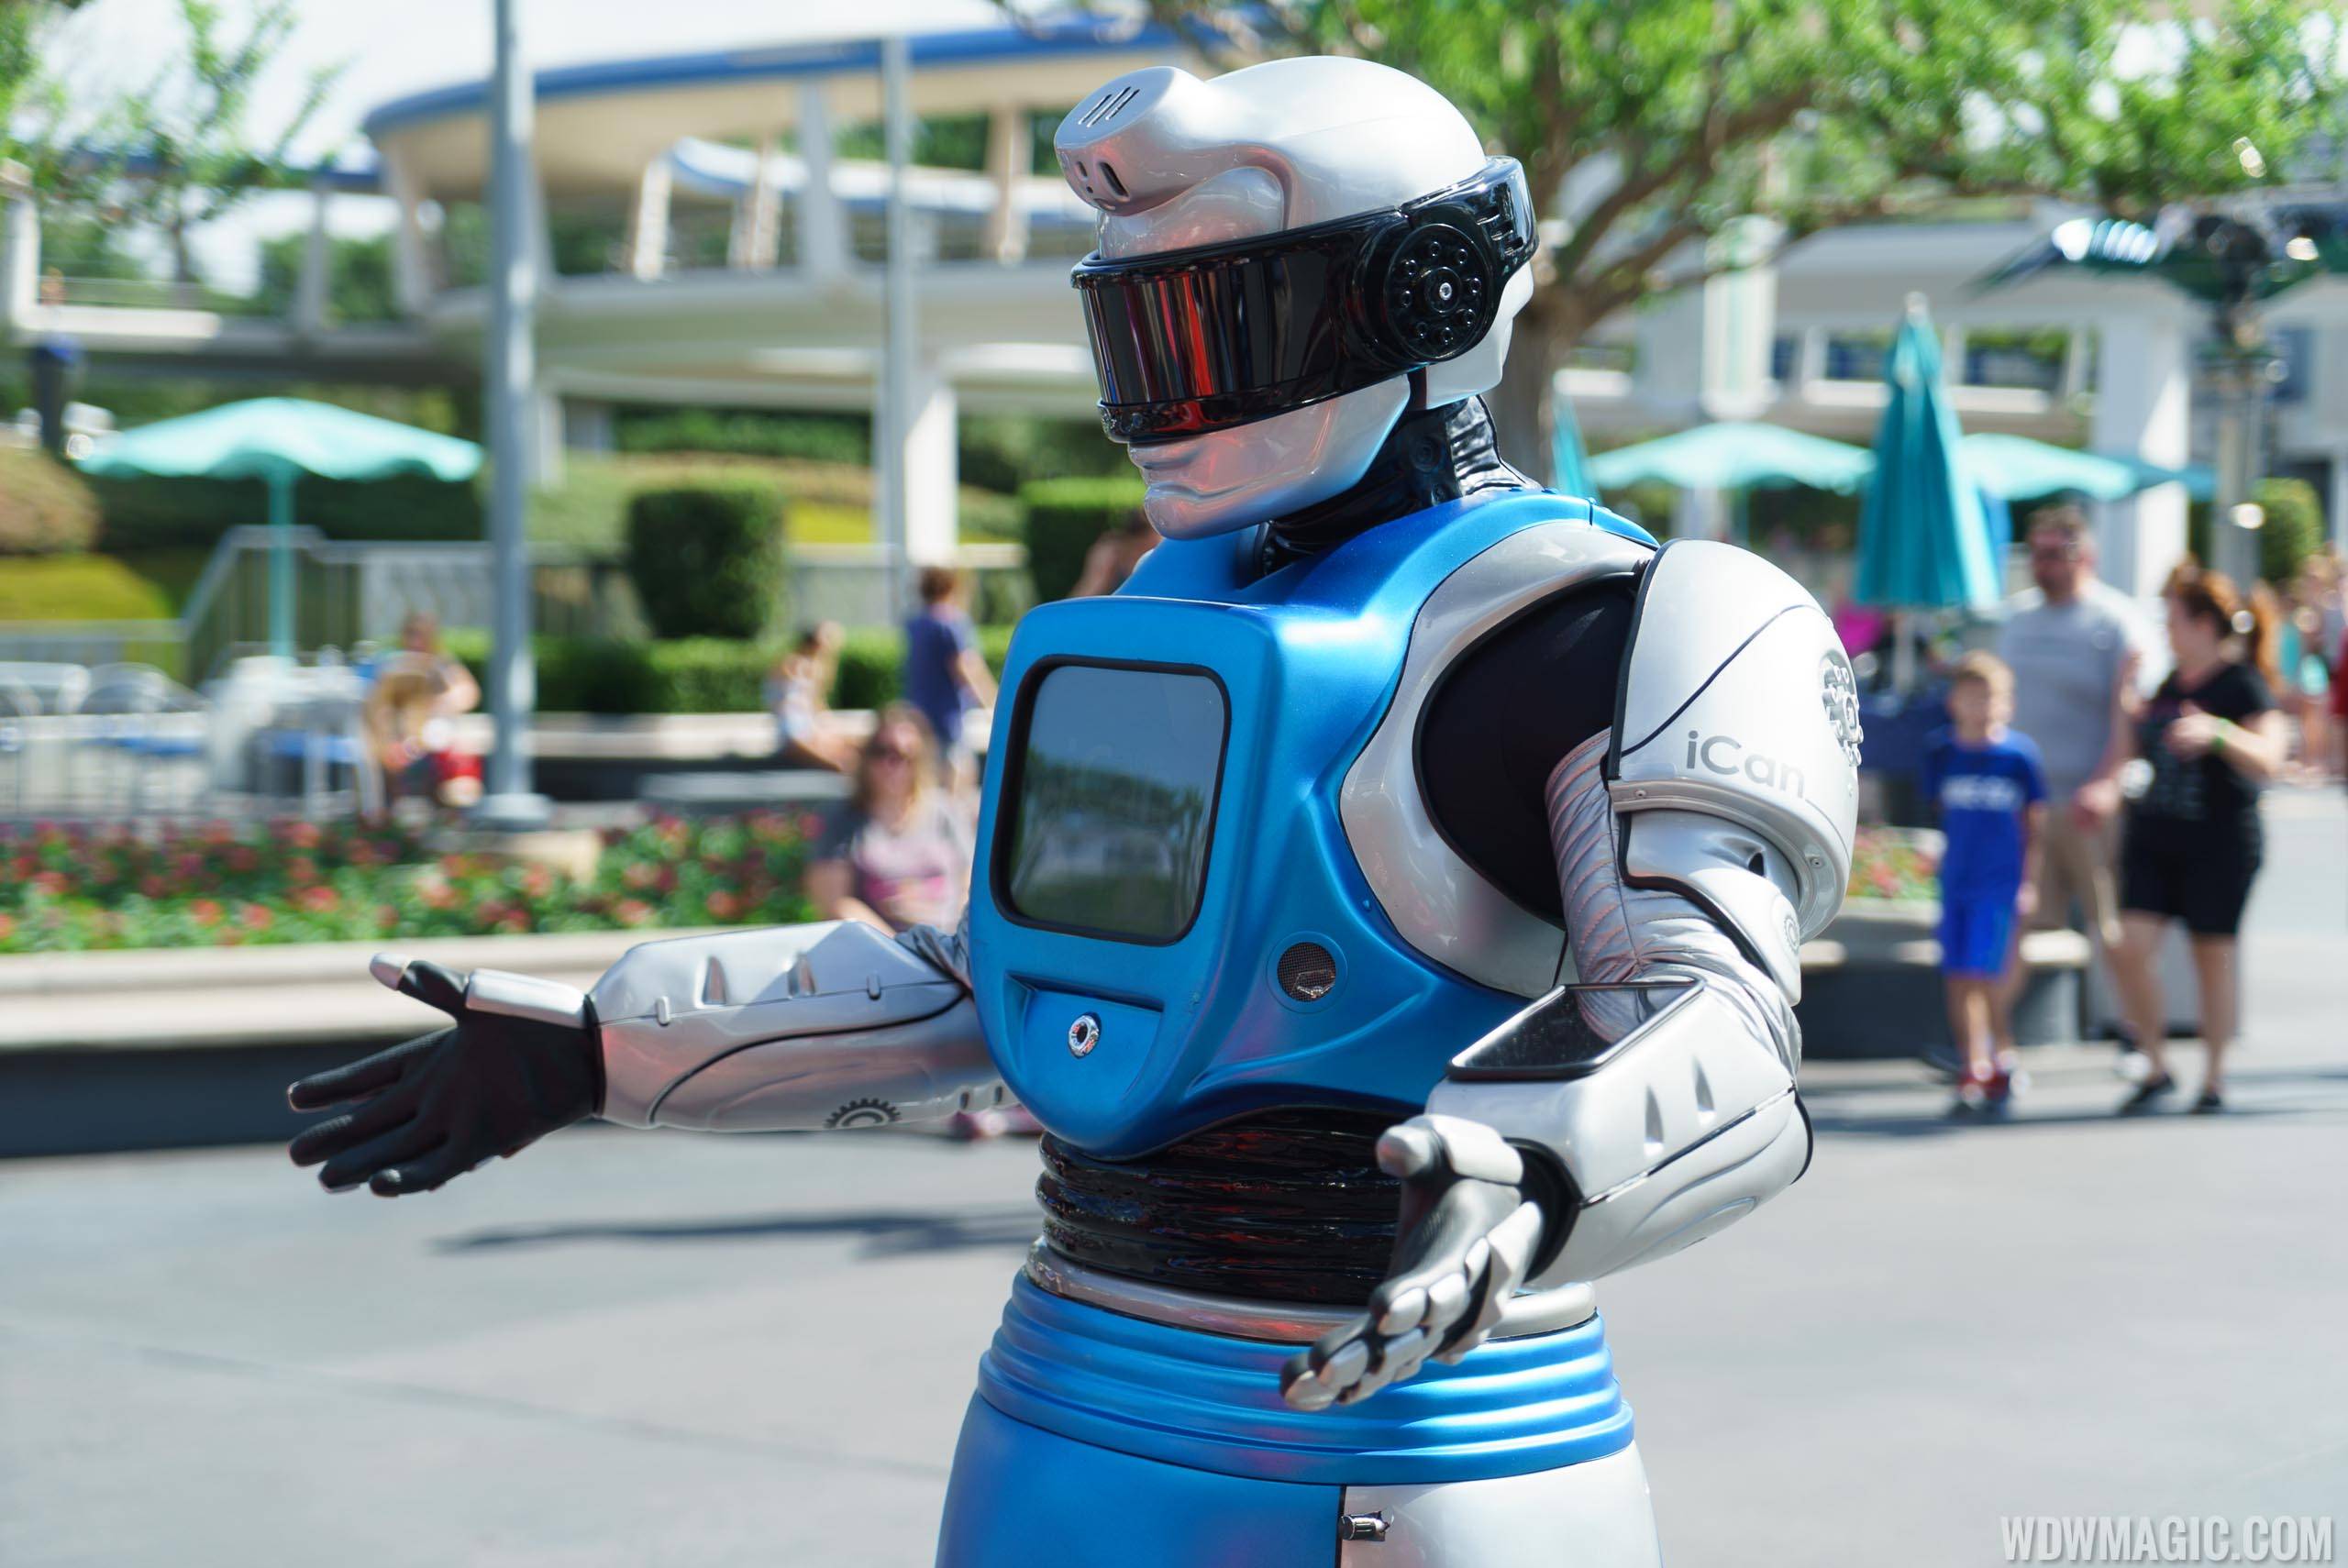 Showbot interactive atmosphere entertainment coming to EPCOT's World Discovery